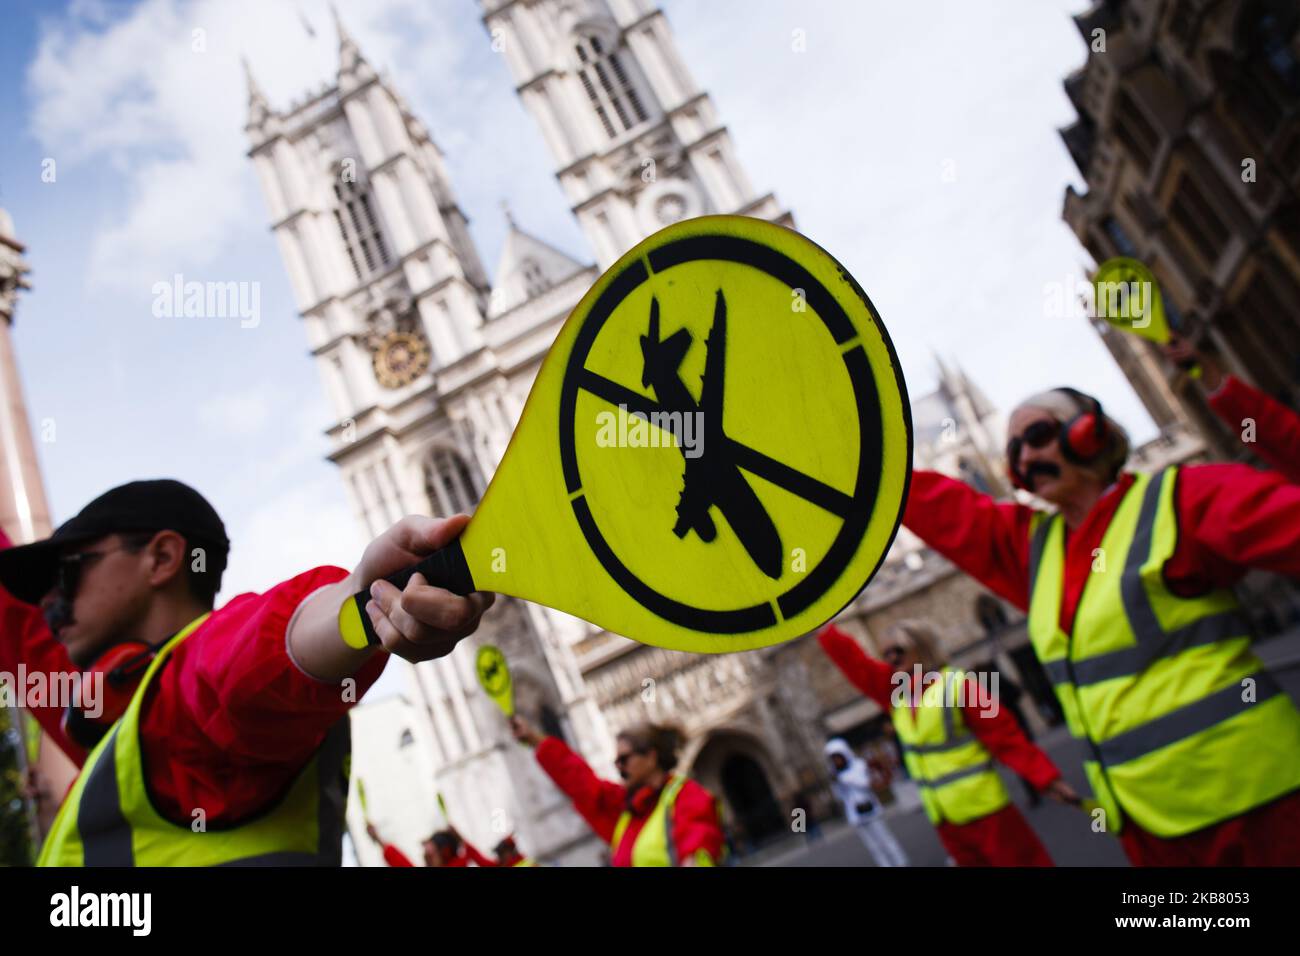 Members of climate change activist movement Extinction Rebellion (XR) dressed as air traffic controllers, with paddles bearing anti-aviation logos, demonstrate in front of Westminster Abbey on the third day of the group's 'International Rebellion' in London, England, on October 9, 2019. Police officers today continued to clear demonstrators and tents from sites across Westminster, with activists having been warned yesterday that they must move to a designated protest area around Nelson's Column in Trafalgar Square or face arrest. Similar blockades by Extinction Rebellion in April, at sites inc Stock Photo